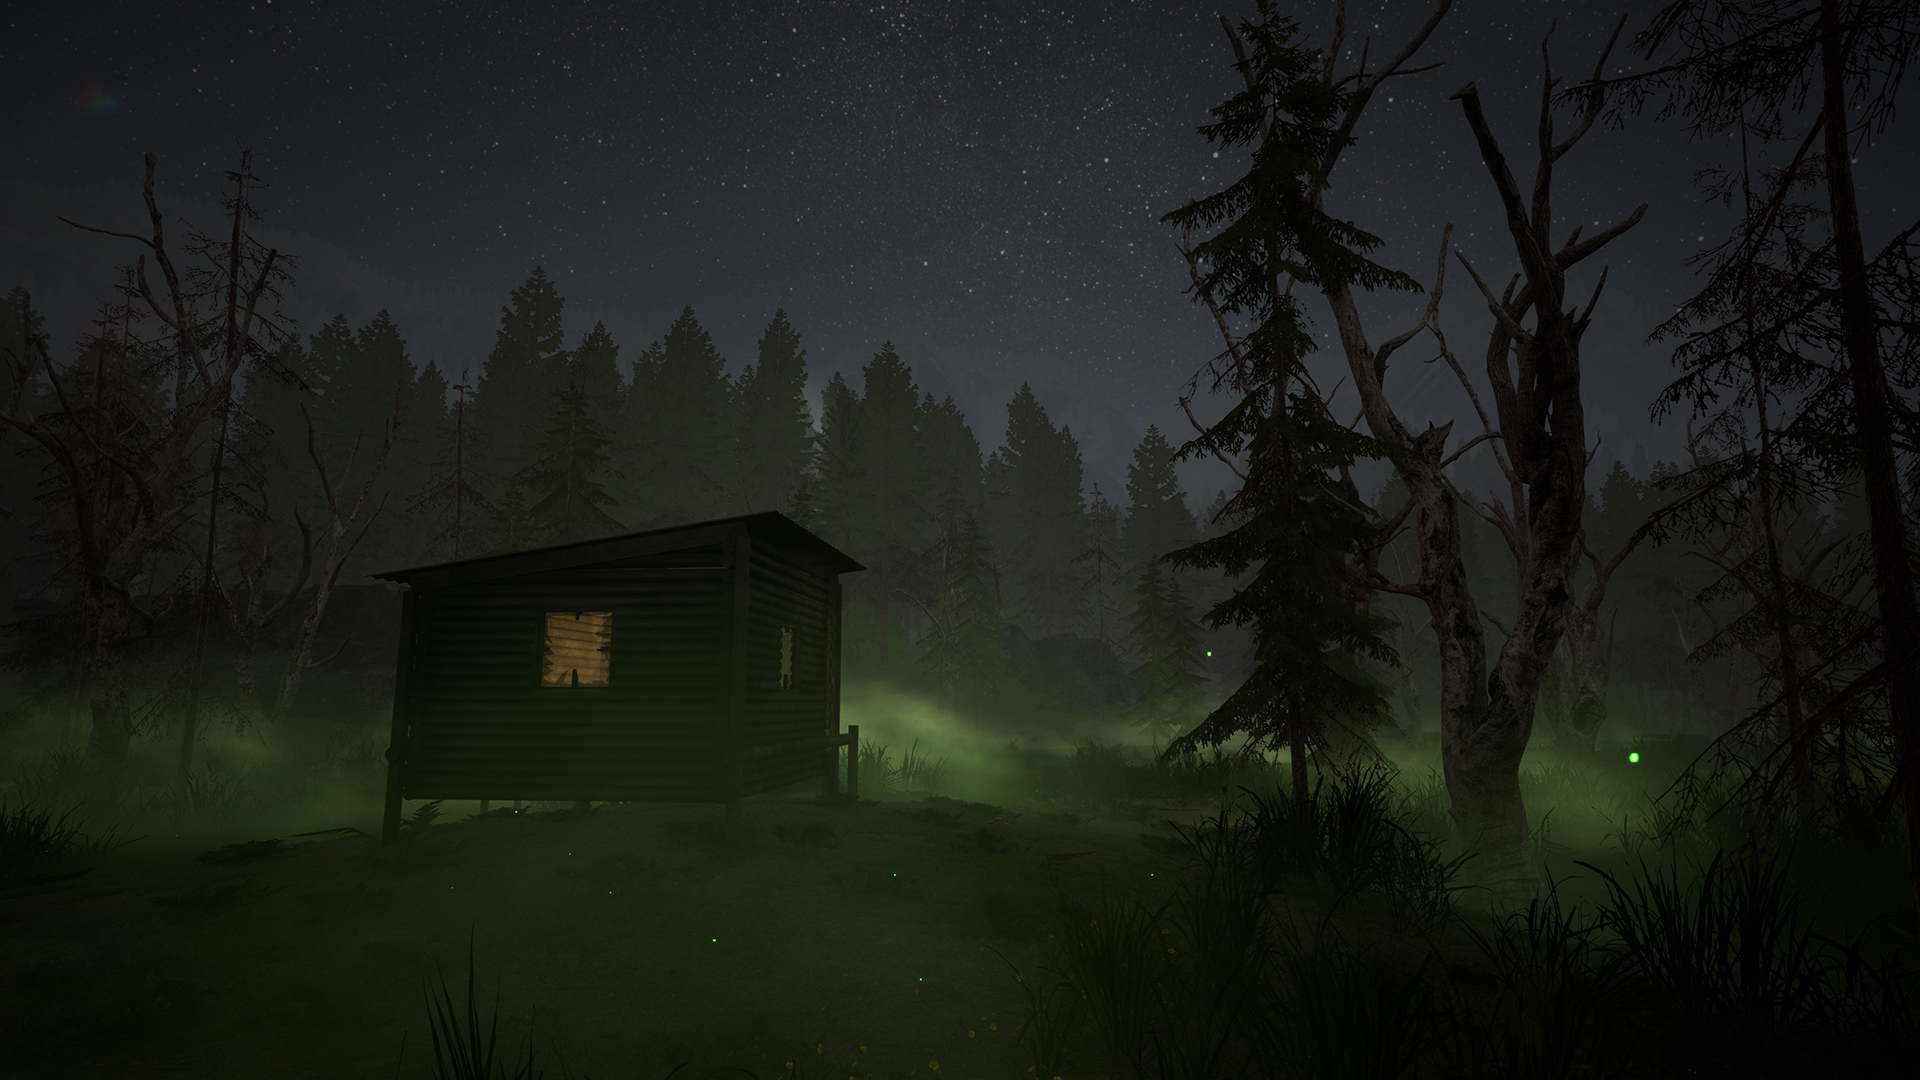 finding bigfoot game steam speirstheamazinghd